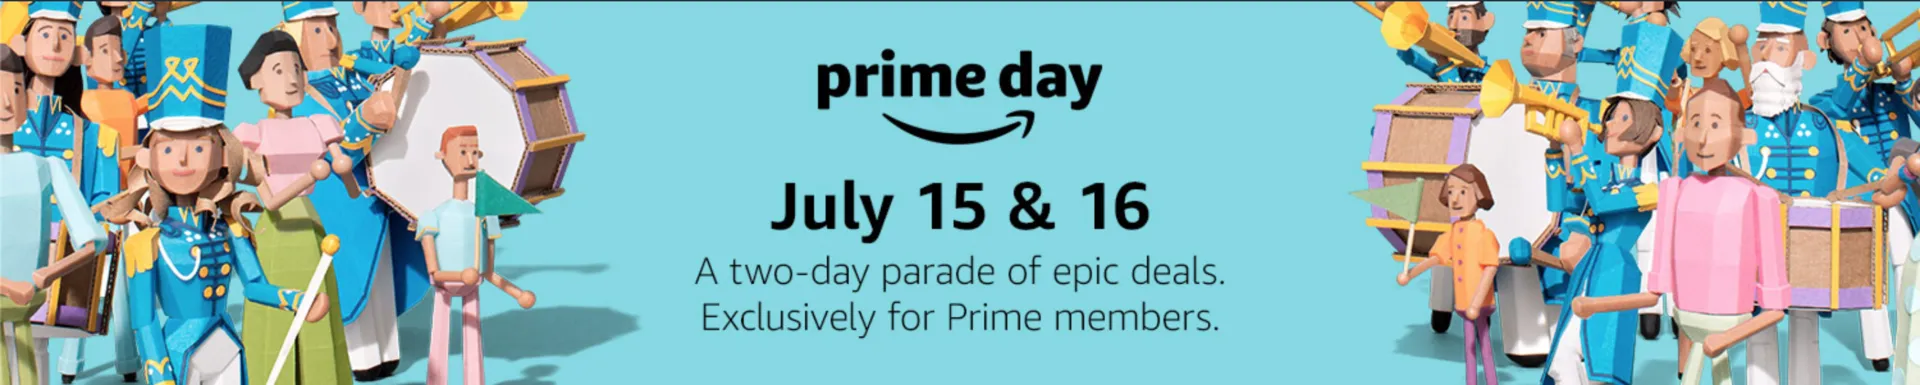 Early Amazon Prime Day Specials